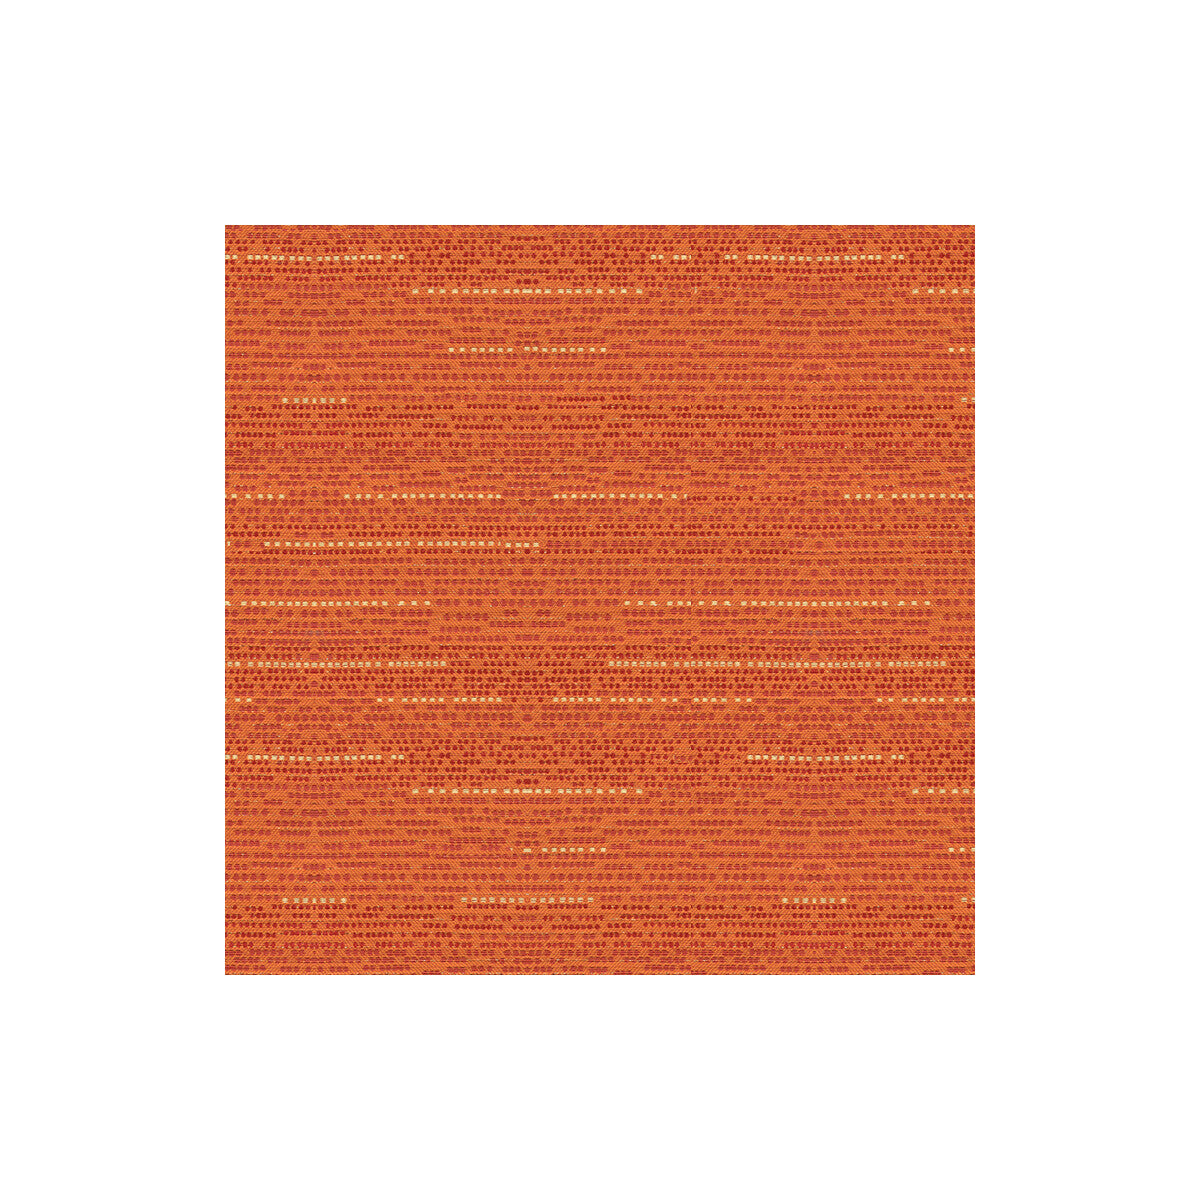 Waterline fabric in mandarin color - pattern 32934.912.0 - by Kravet Contract in the Contract Gis collection